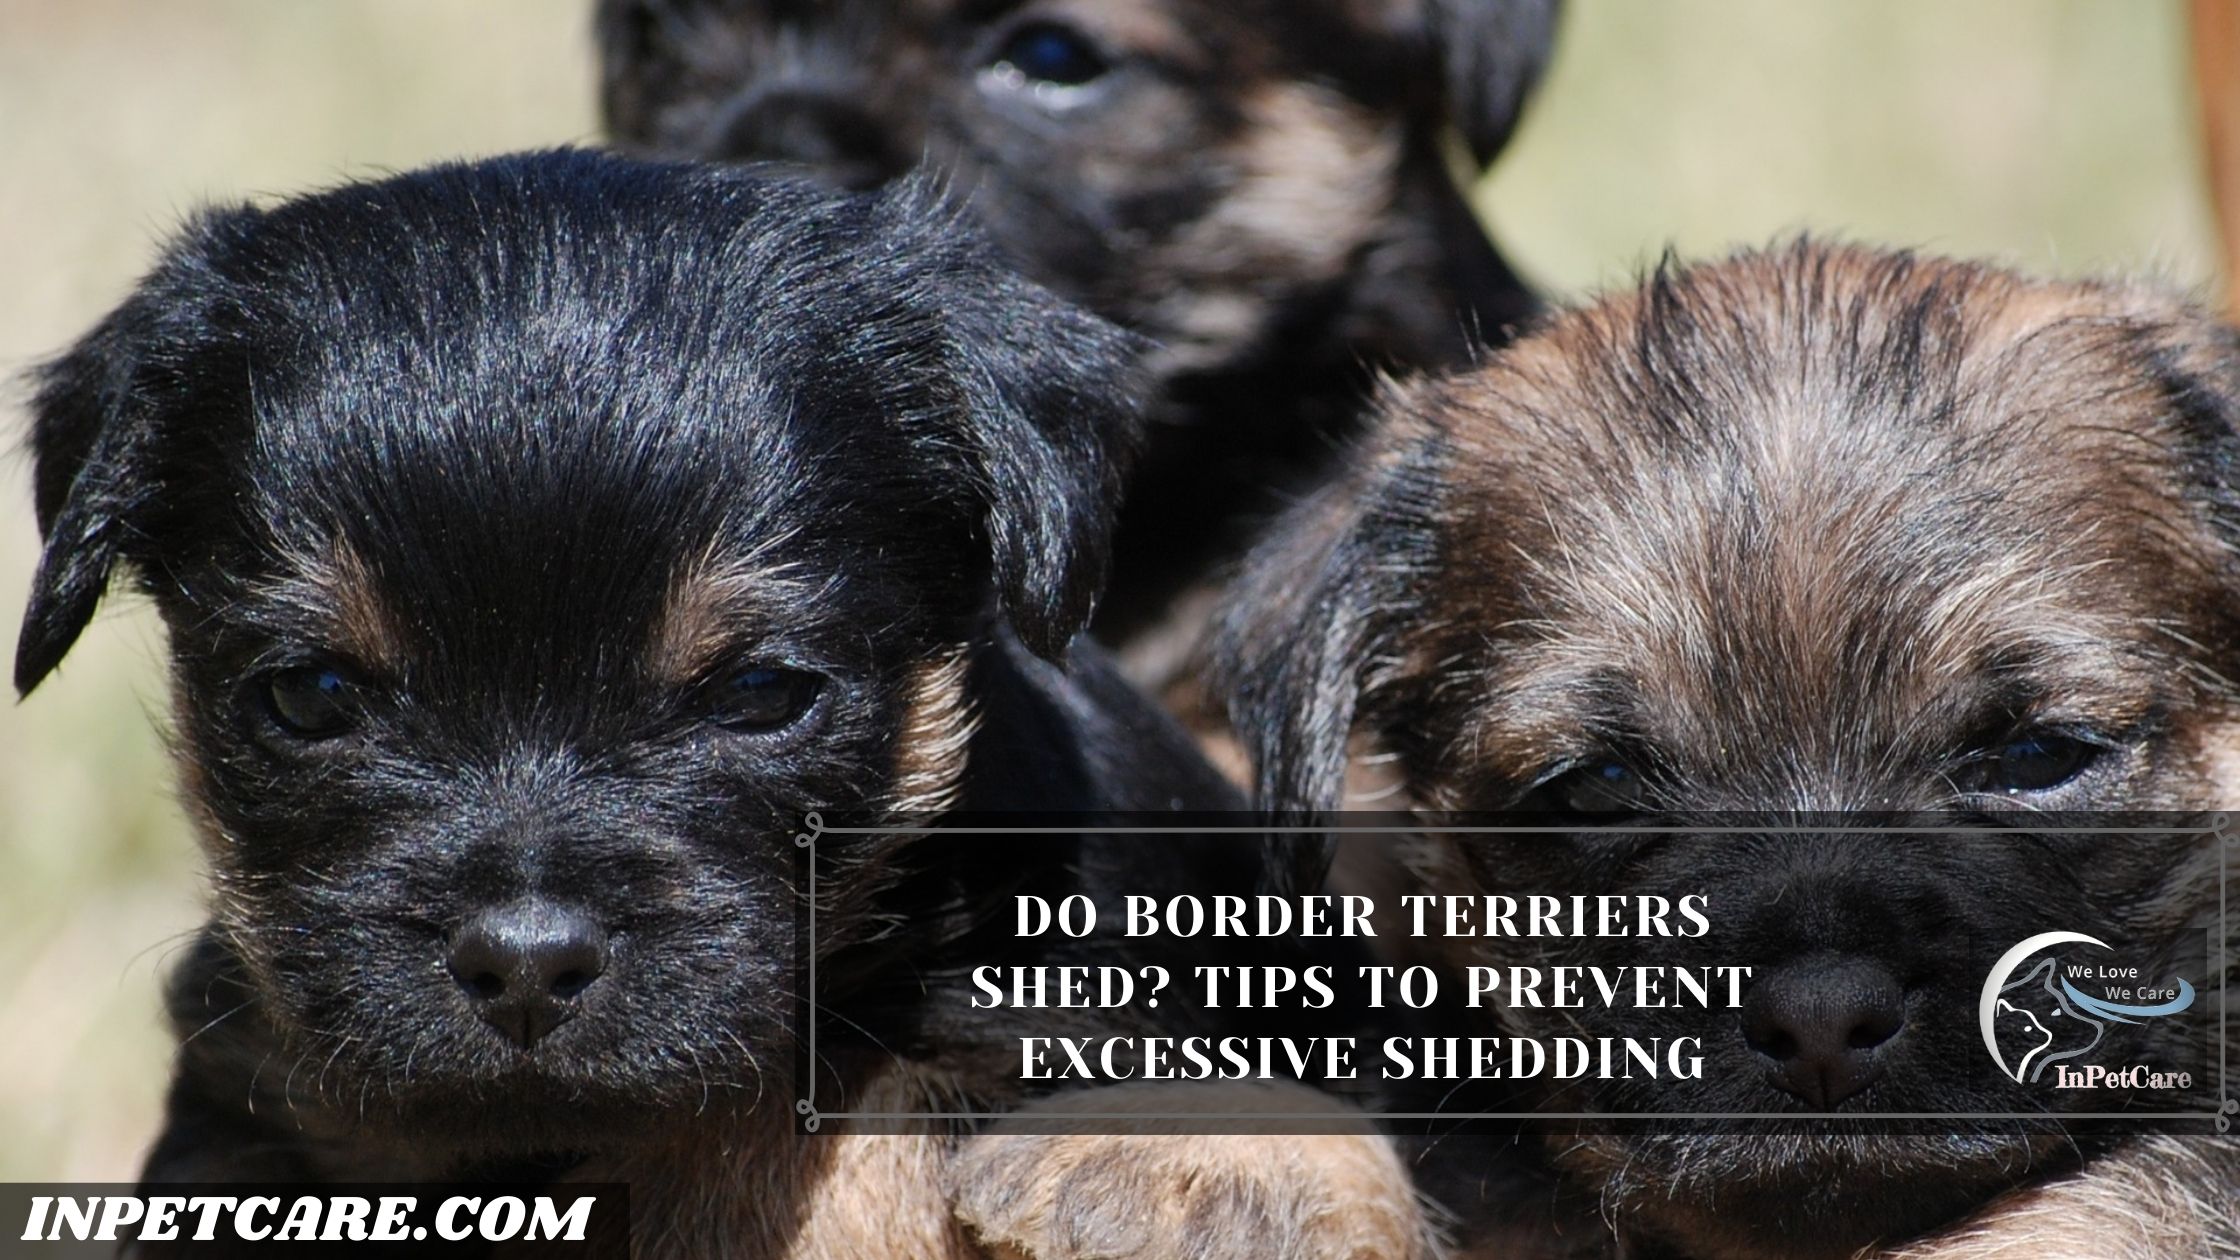 Do Border Terriers Shed? Tips To Prevent Excessive Shedding